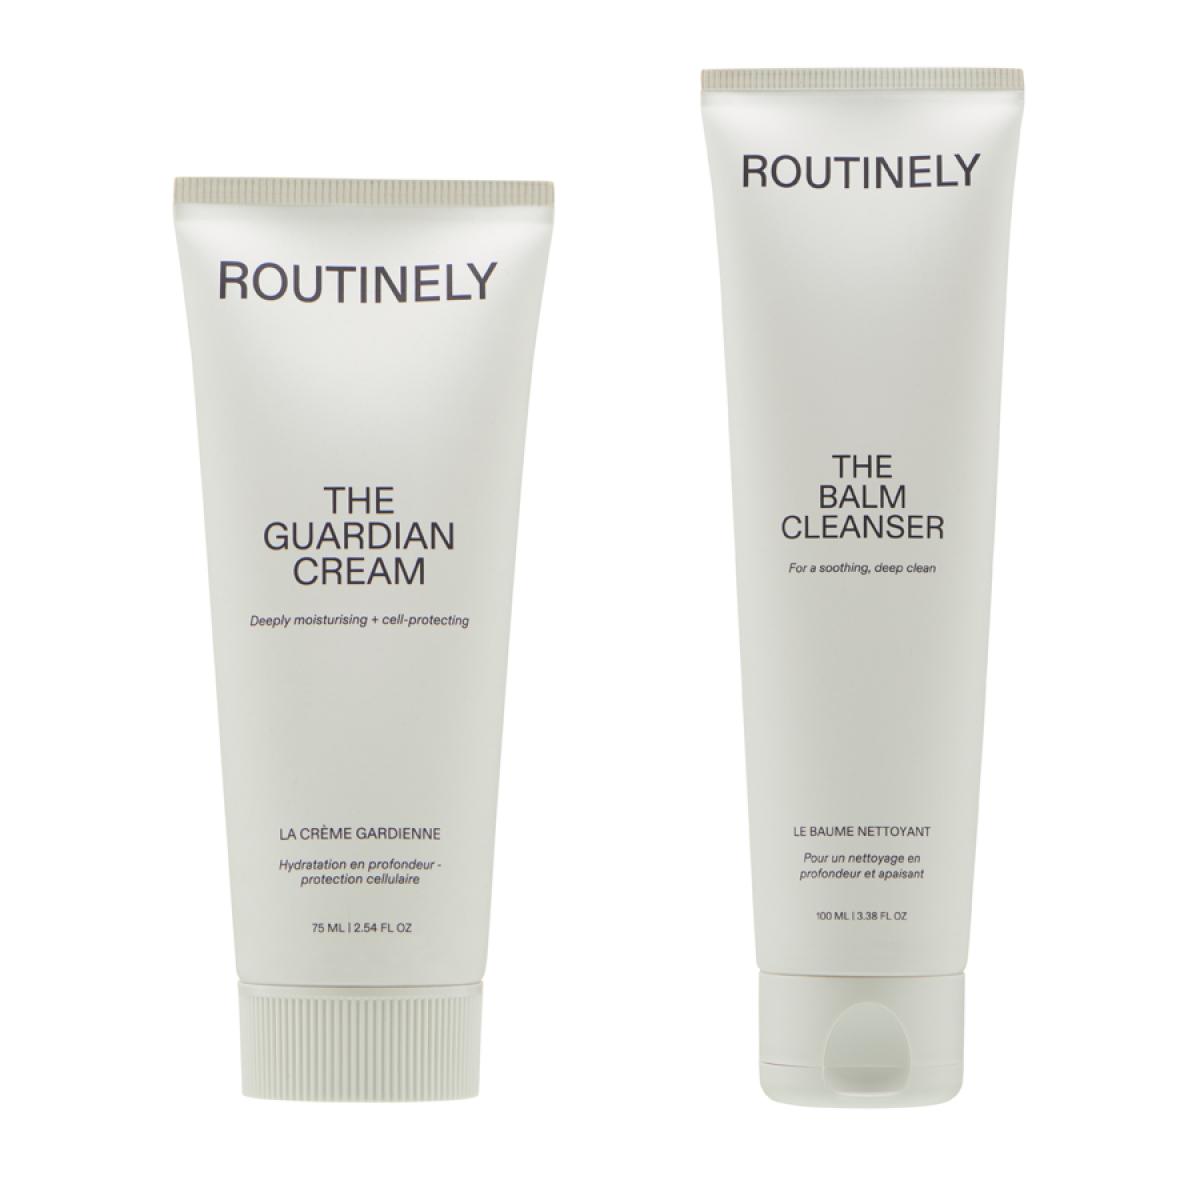 The Balm Cleanser et The Guardian Cream de Routinely